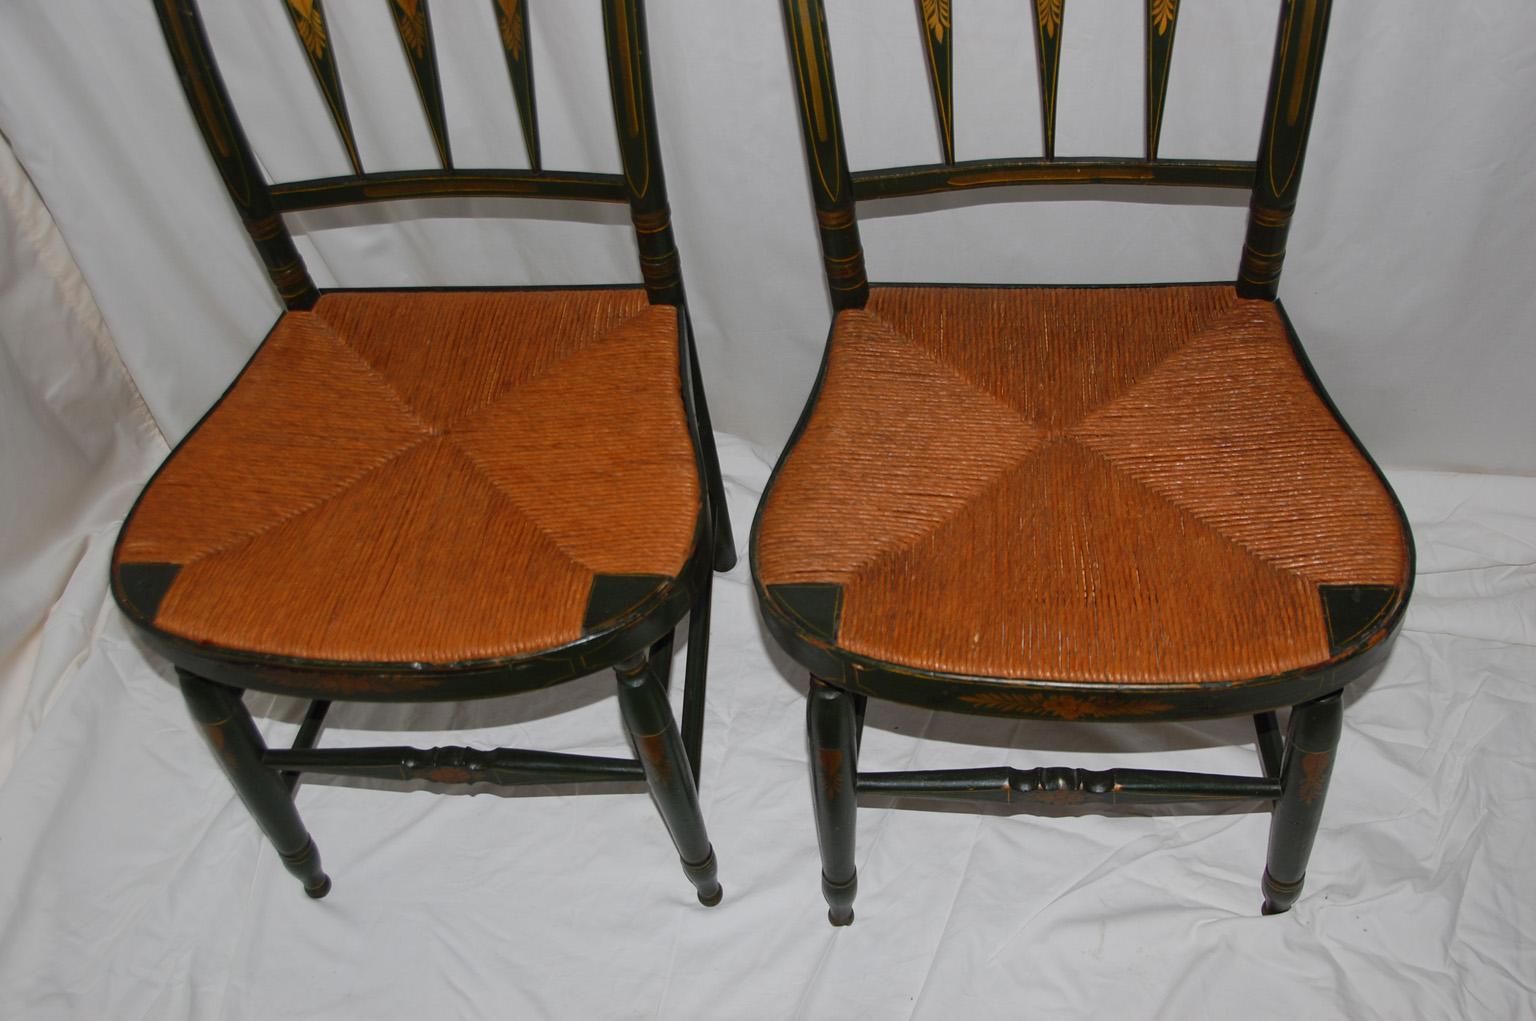 Rush American Early 19th Century Sheraton Pair of Painted Arrowback Side Chairs